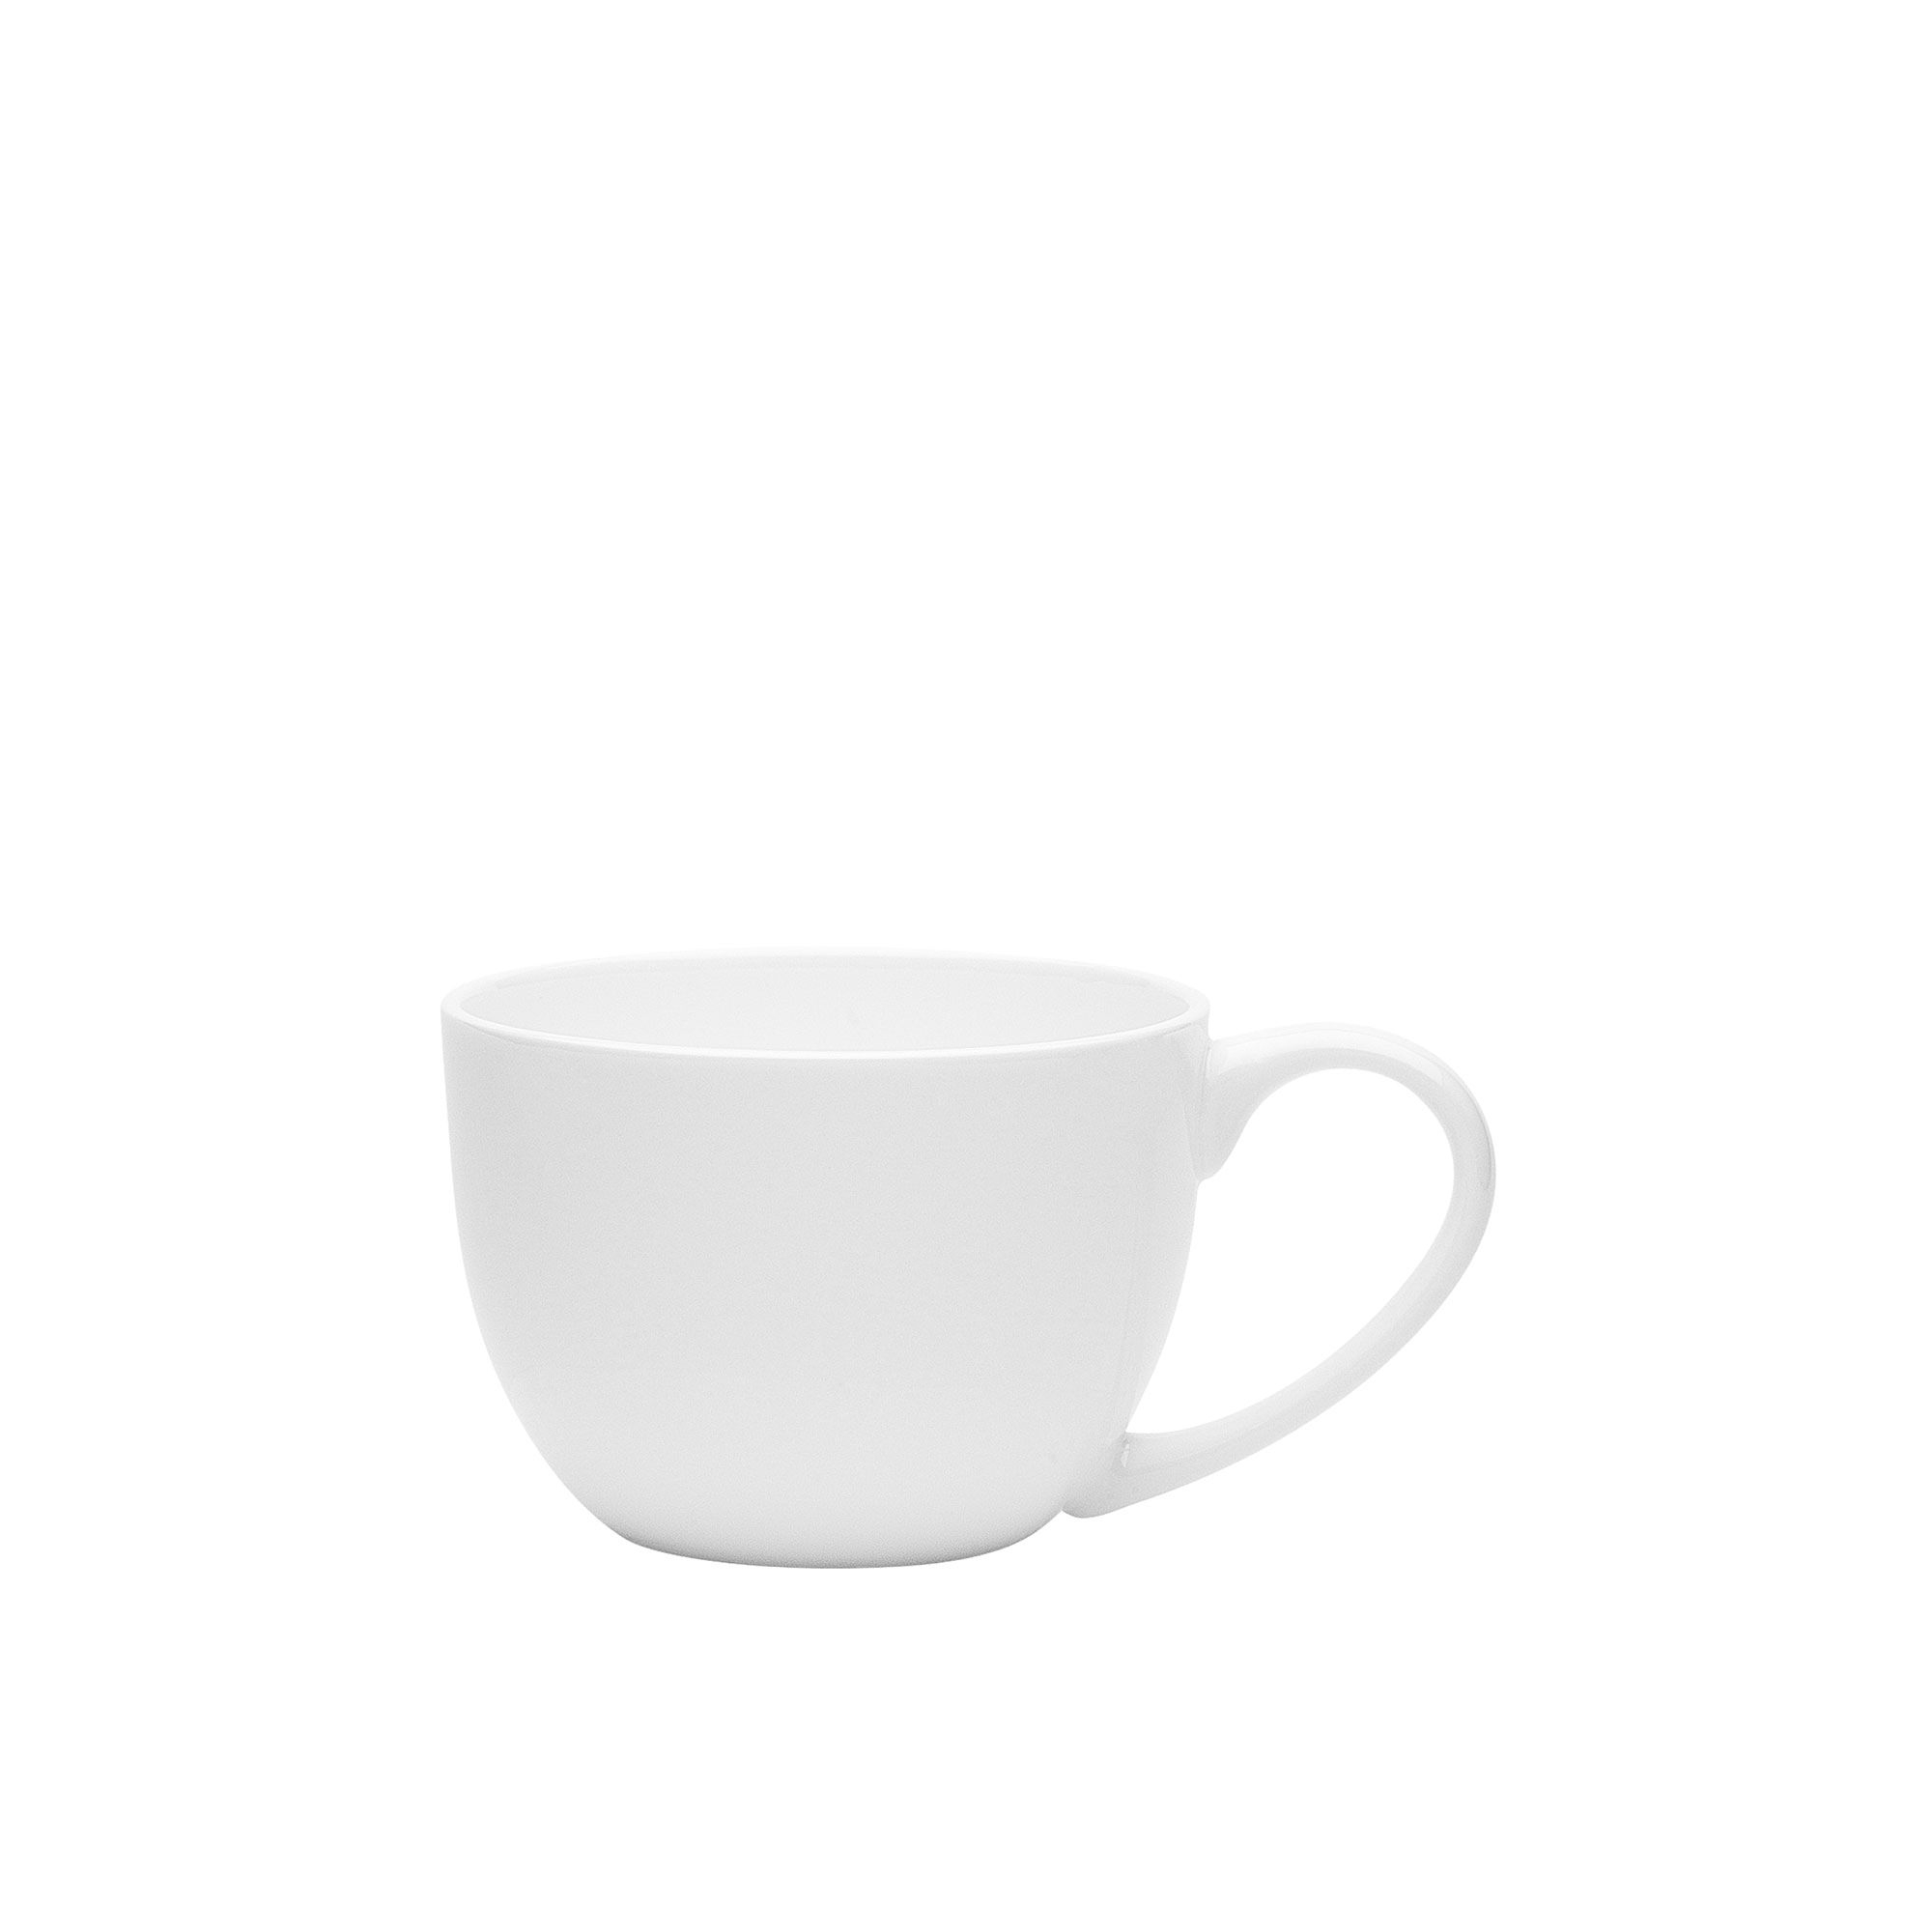 Ecology Canvas Espresso Cup 100ml White Image 1